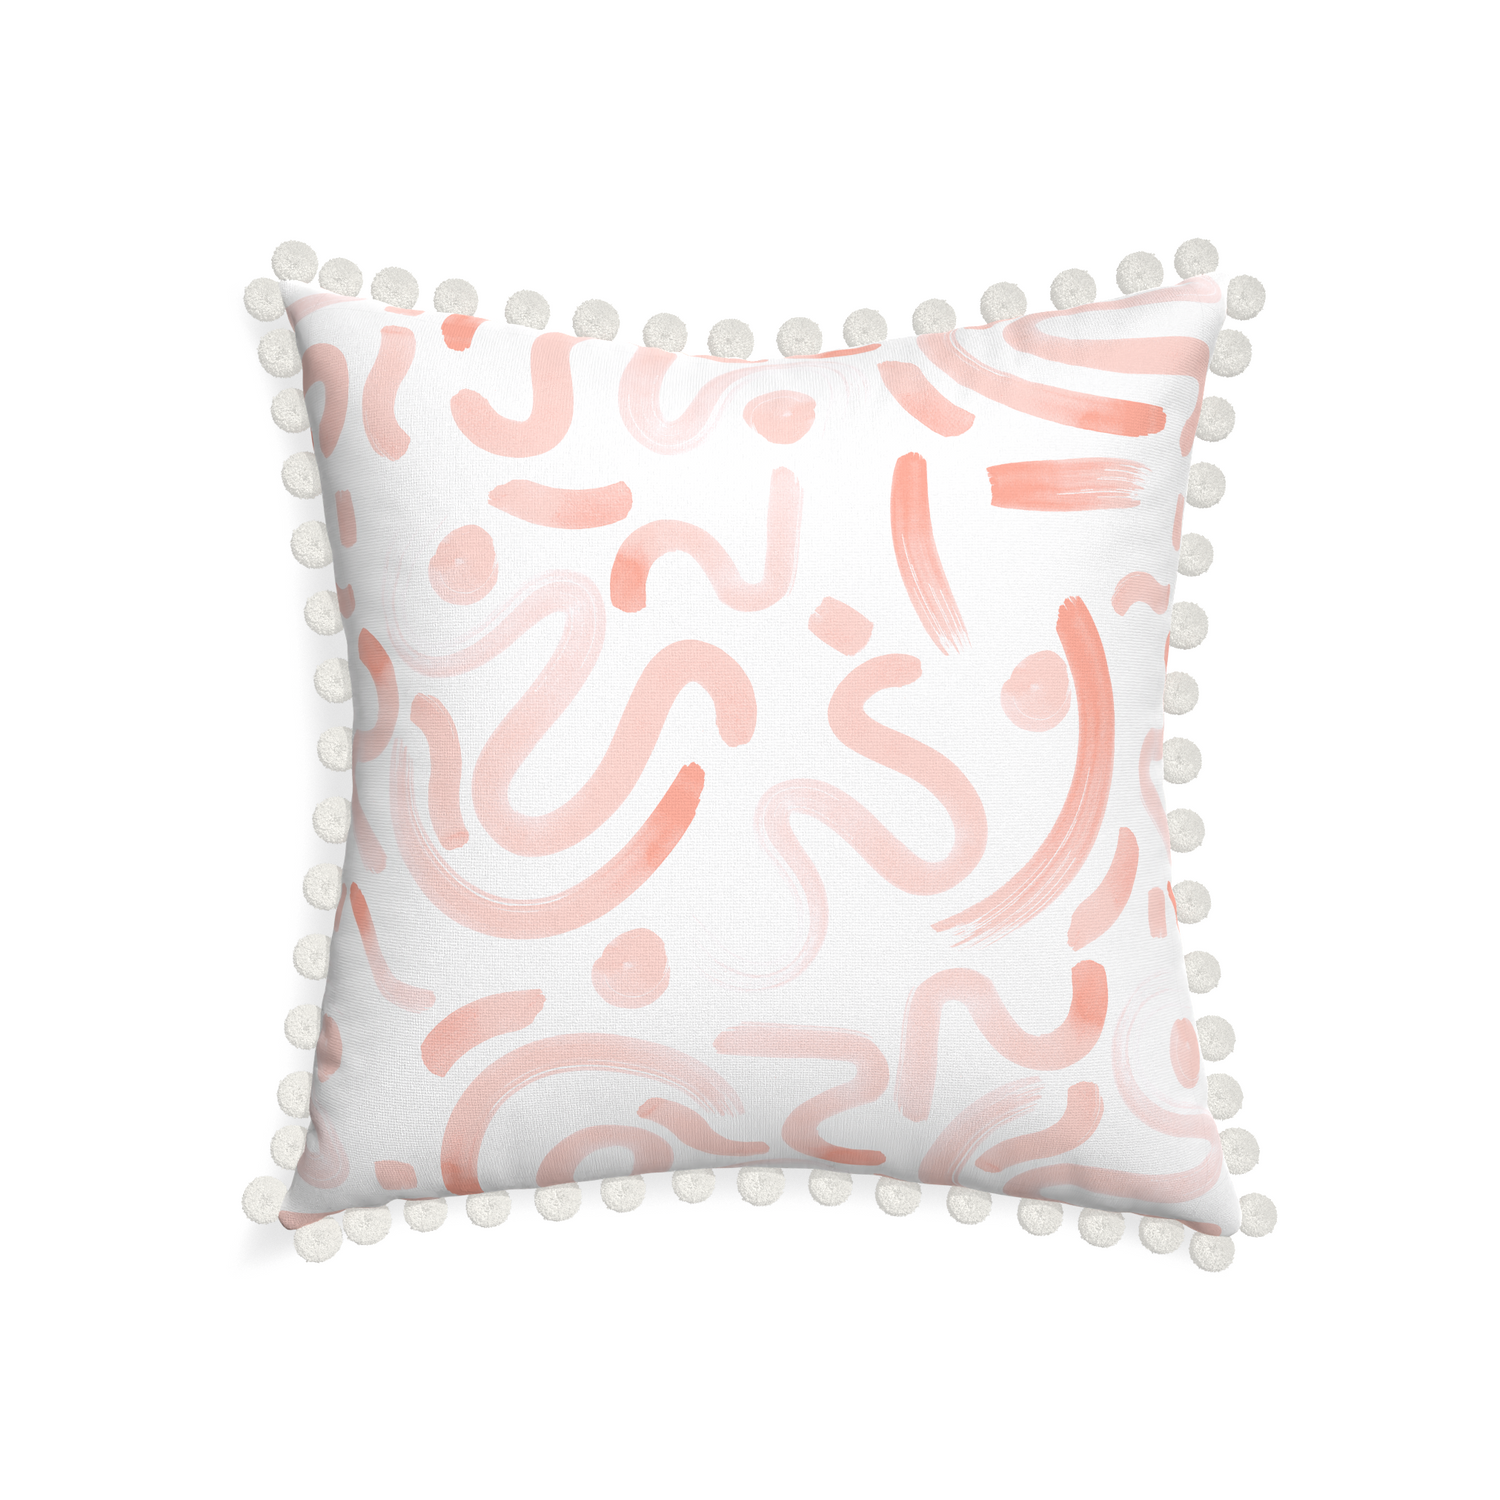 22-square hockney pink custom pink graphicpillow with snow pom pom on white background